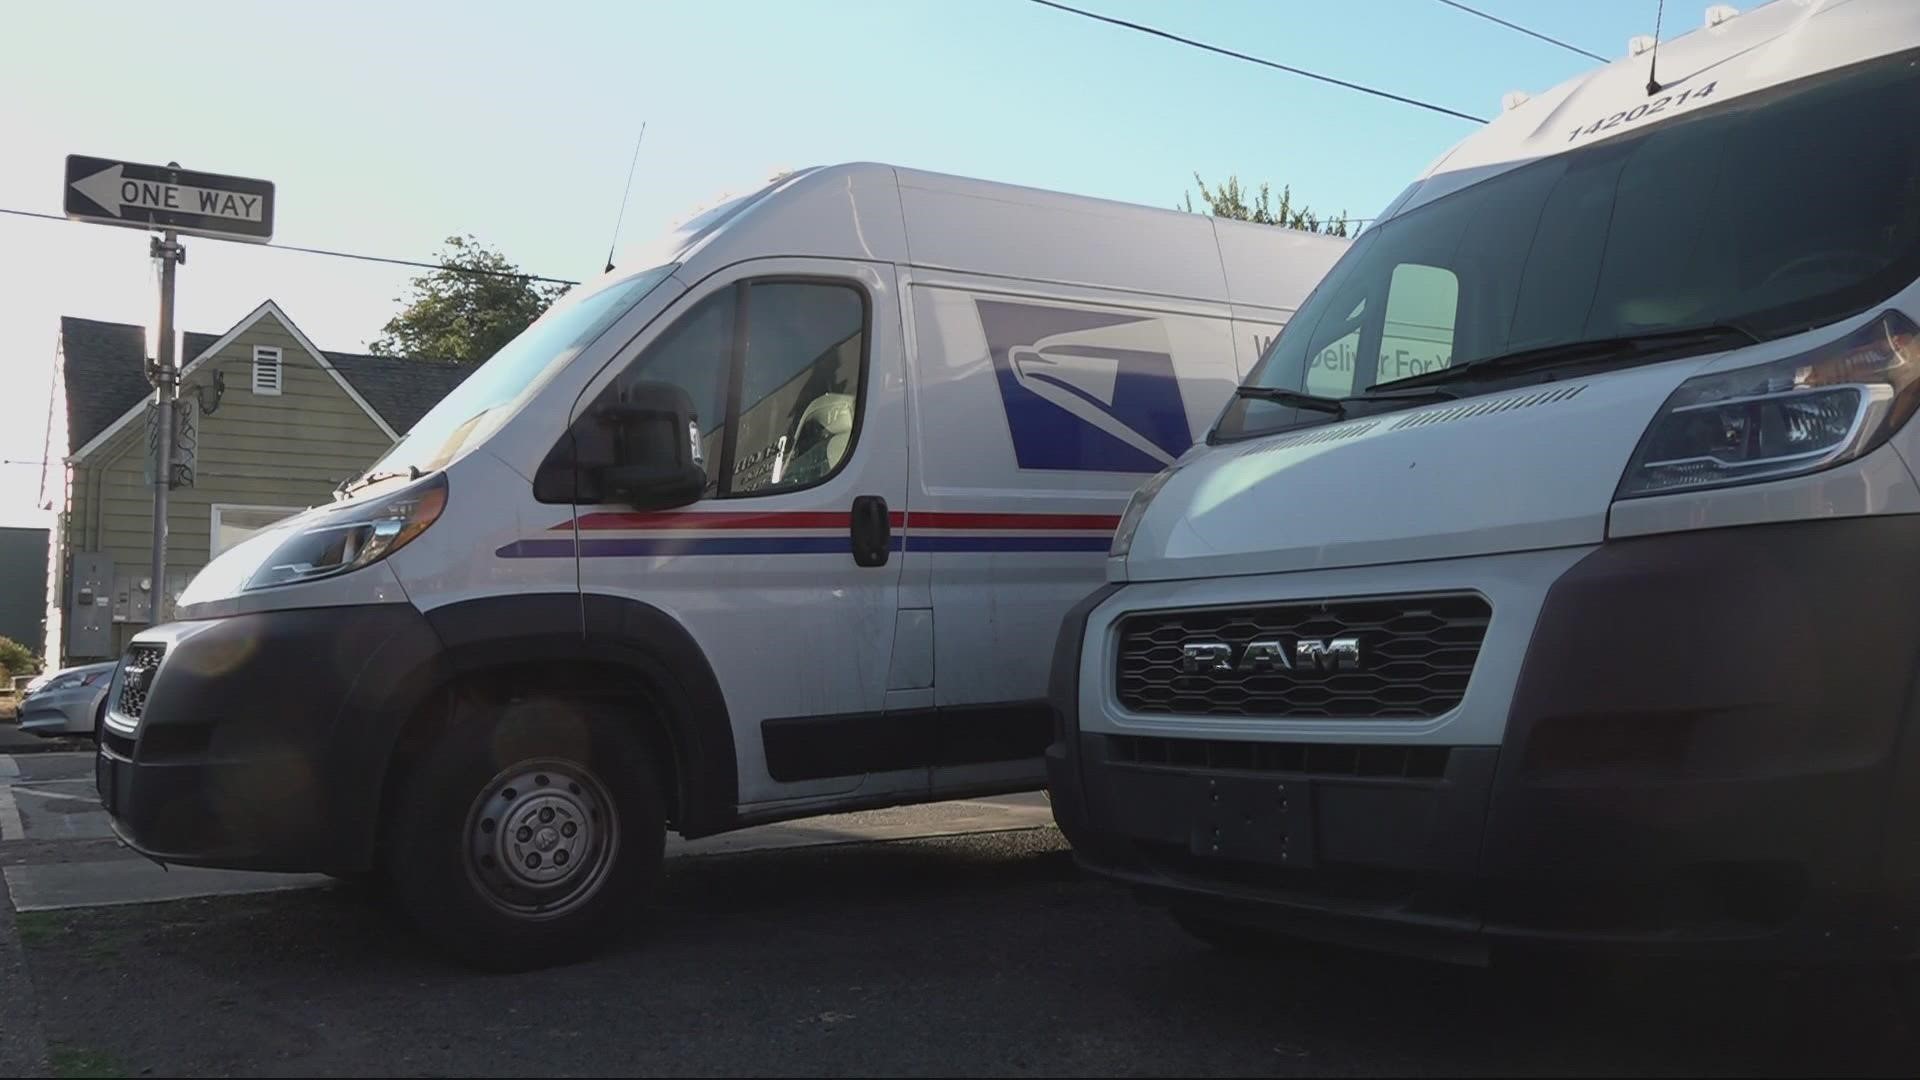 United States Postal Inspection Service is working to recover the stolen mail and offering a reward up to $50,000 for information leading to an arrest and conviction